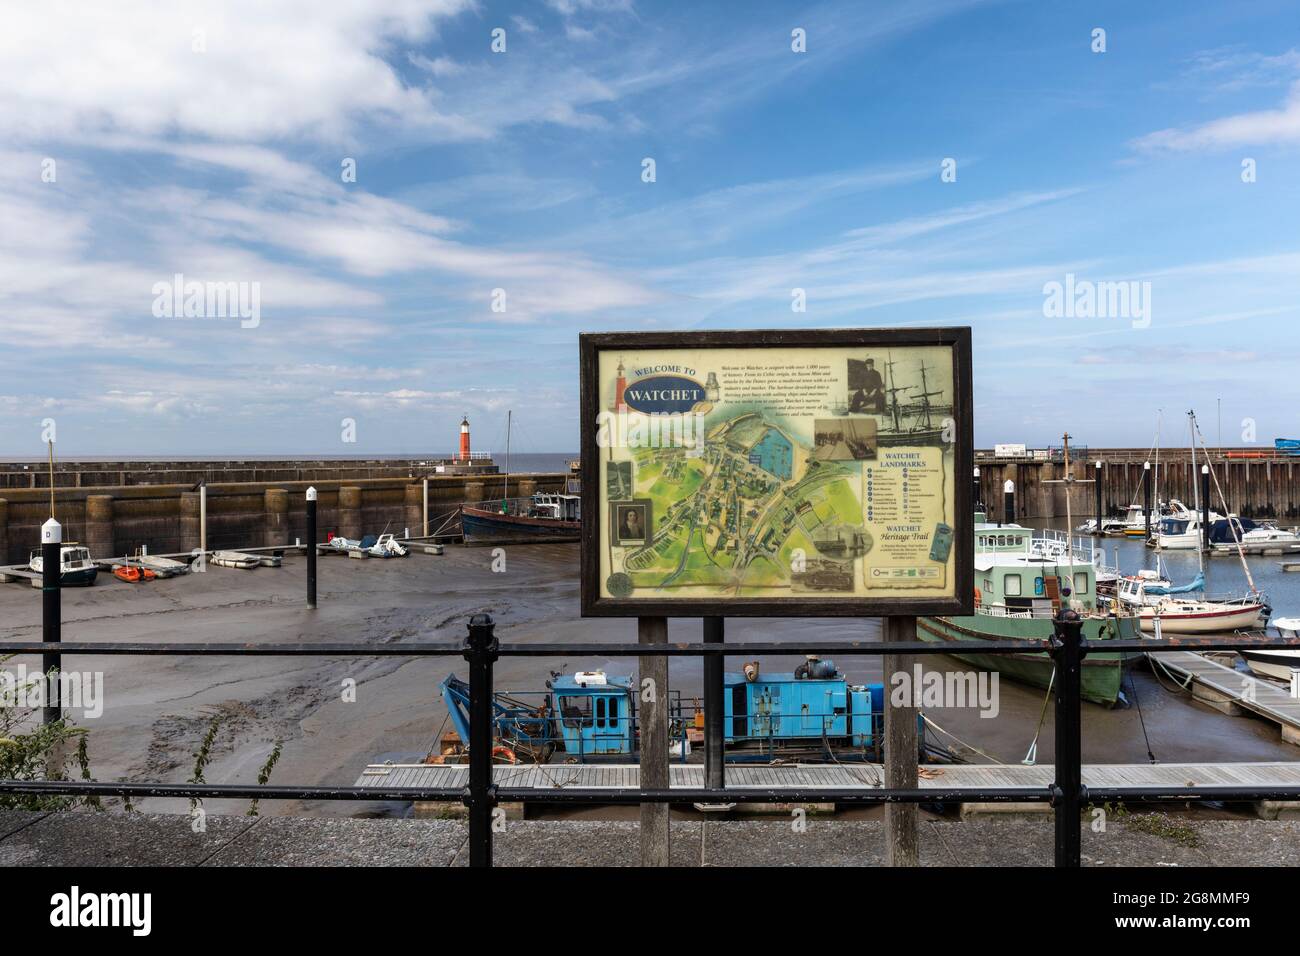 Welcome to Watchet map revealing the history of Watchet. Situated near Watchet harbour. Somerset, England, UK Stock Photo